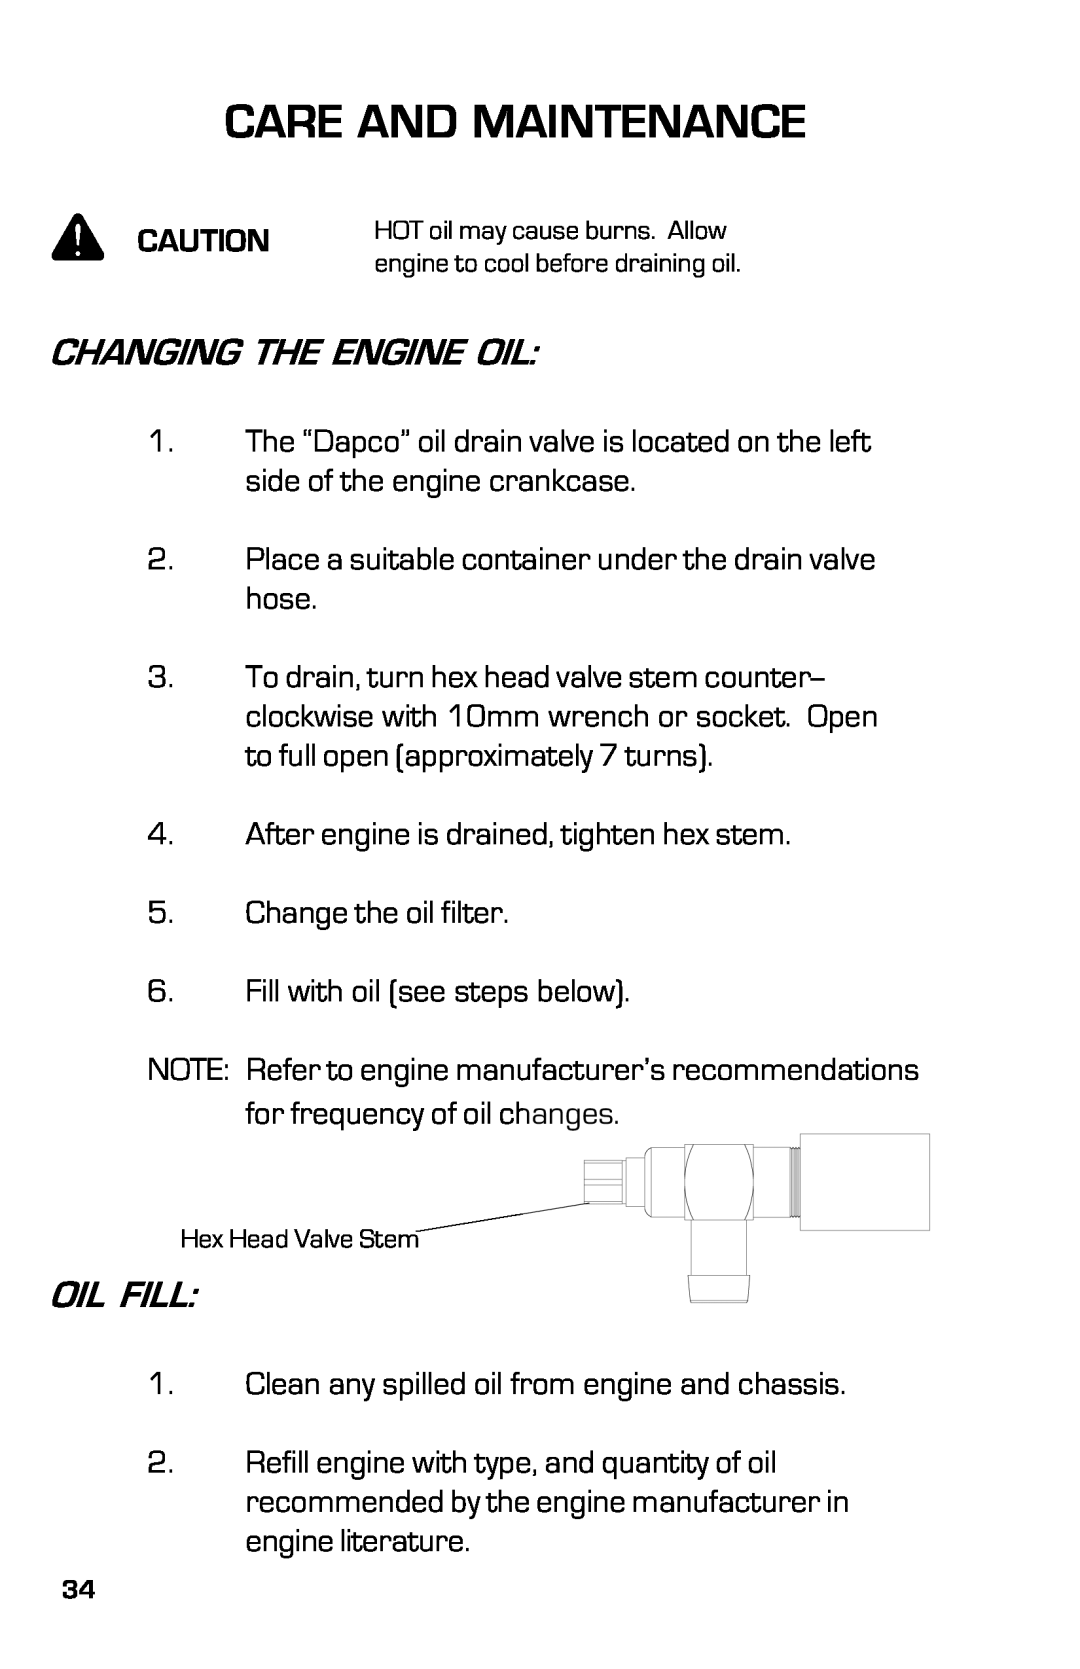 Dixon 2003, 13639-0702 manual Care And Maintenance, Changing The Engine Oil, Oil Fill 